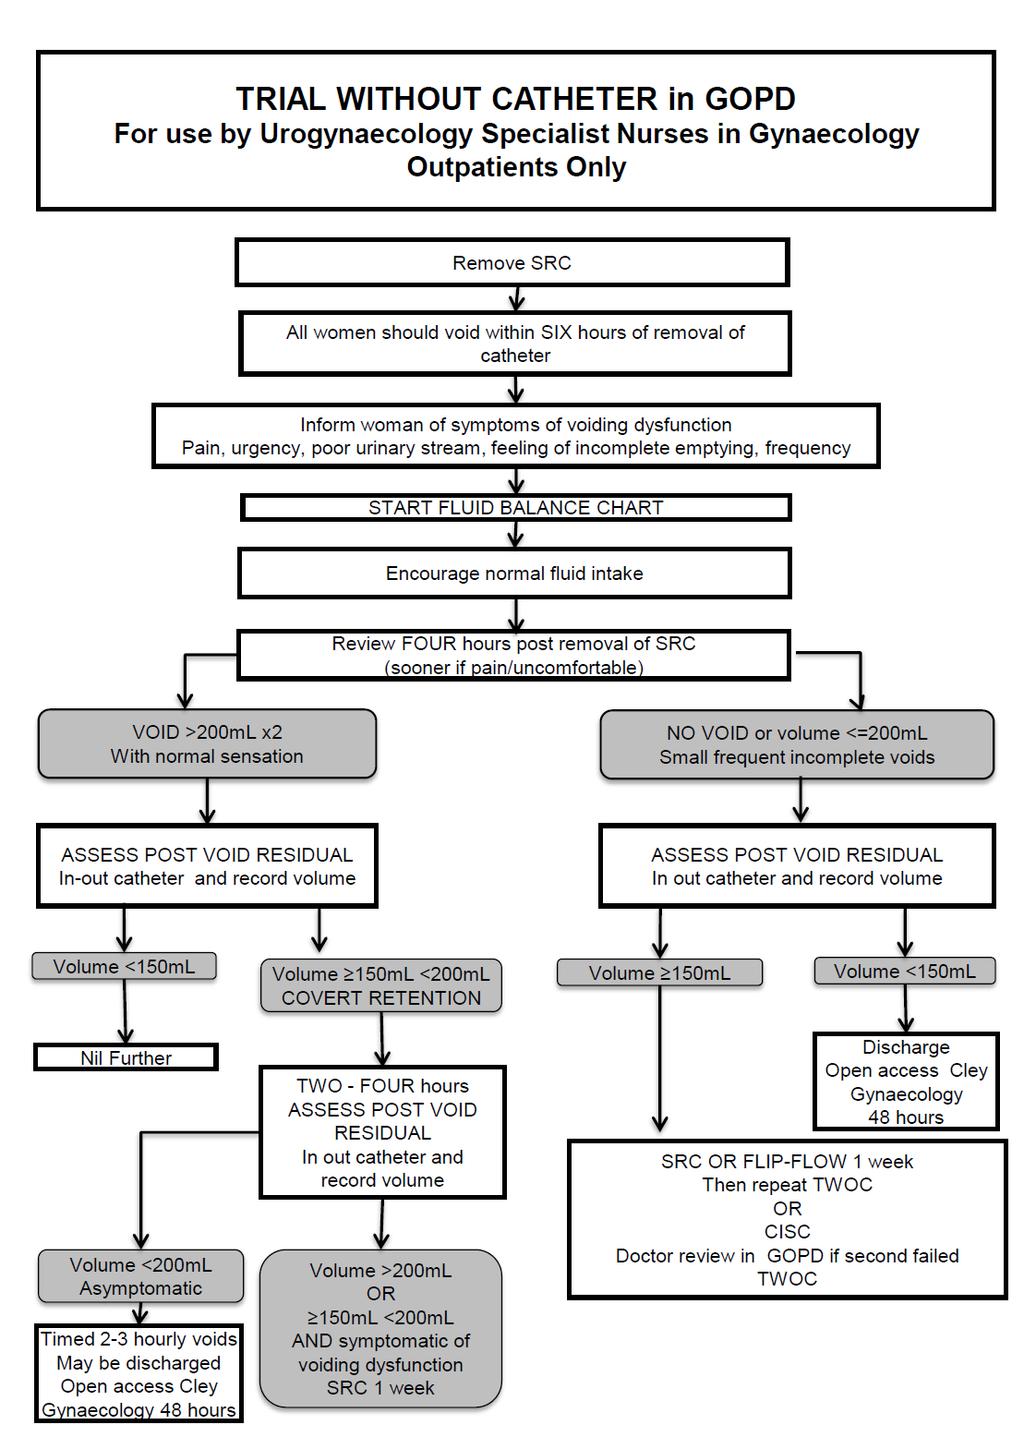 FLOW CHART 3: TRIAL WITHOUT CATHETER IN GOPD Available